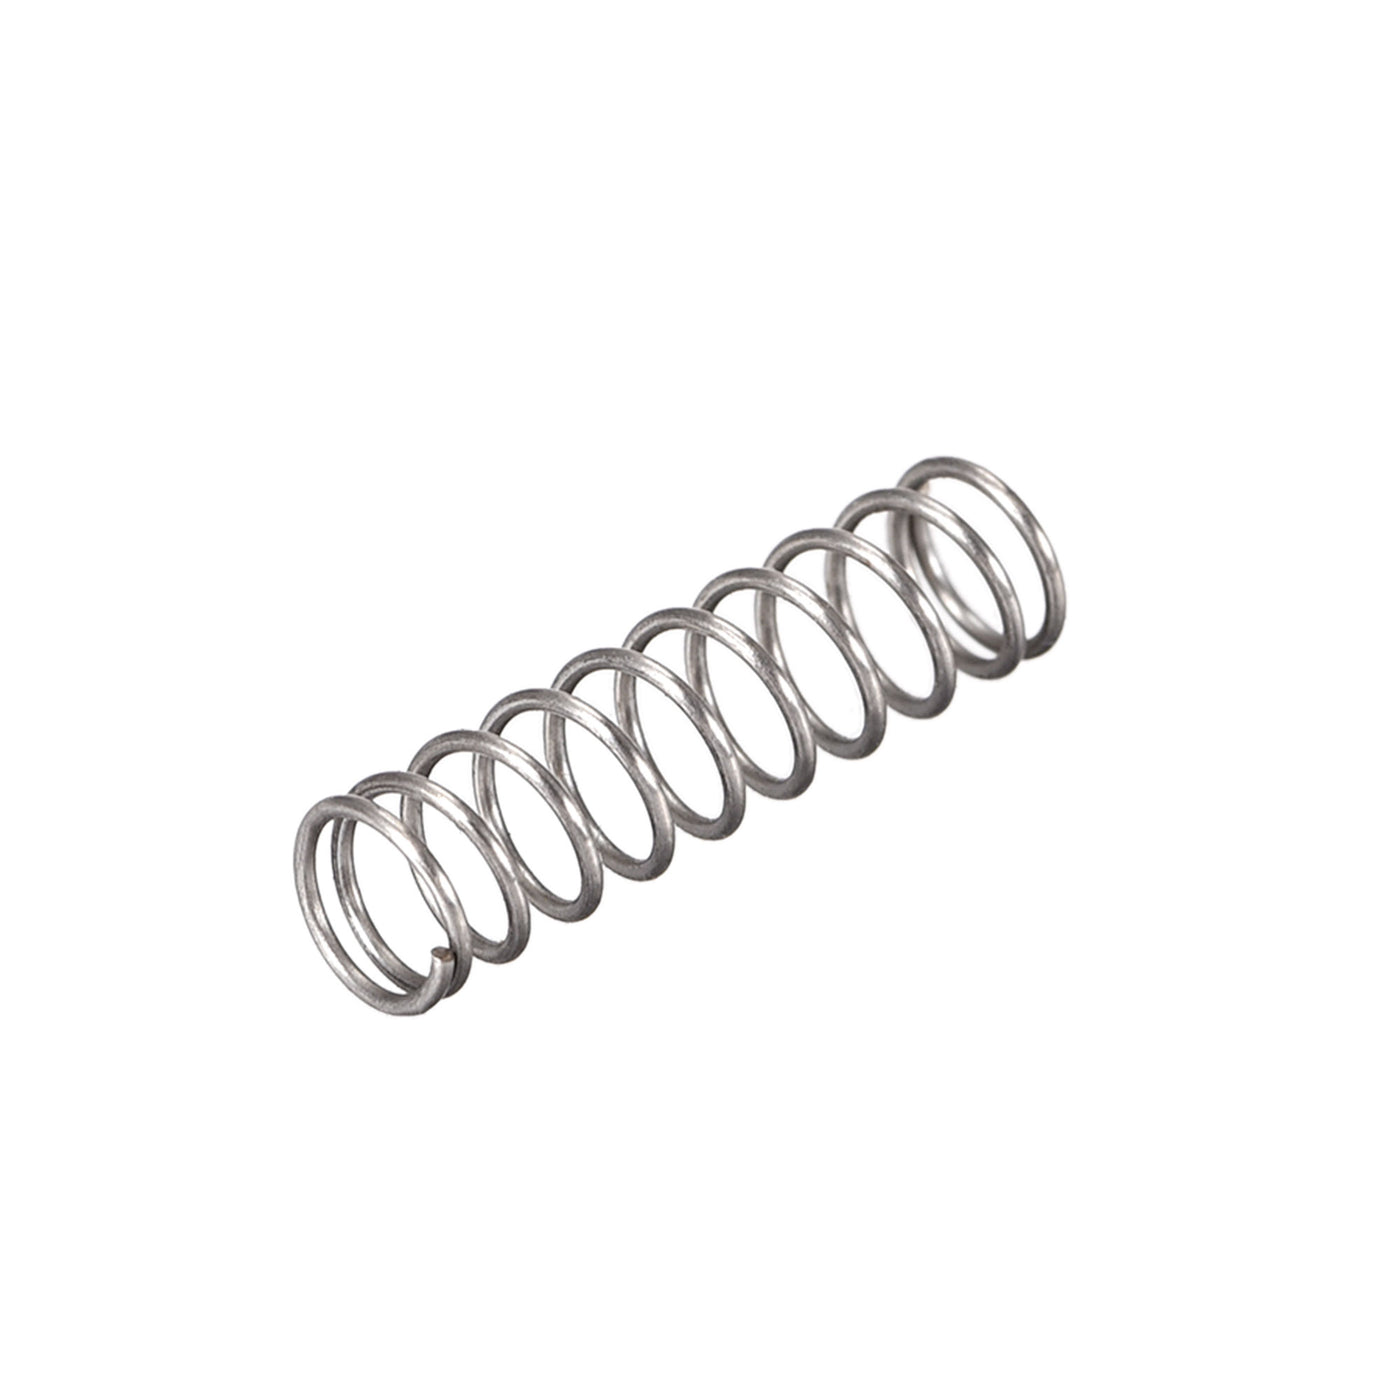 uxcell Uxcell Compressed Spring,4mmx0.4mmx15mm Free Length,7.1N Load Capacity,Gray,10pcs